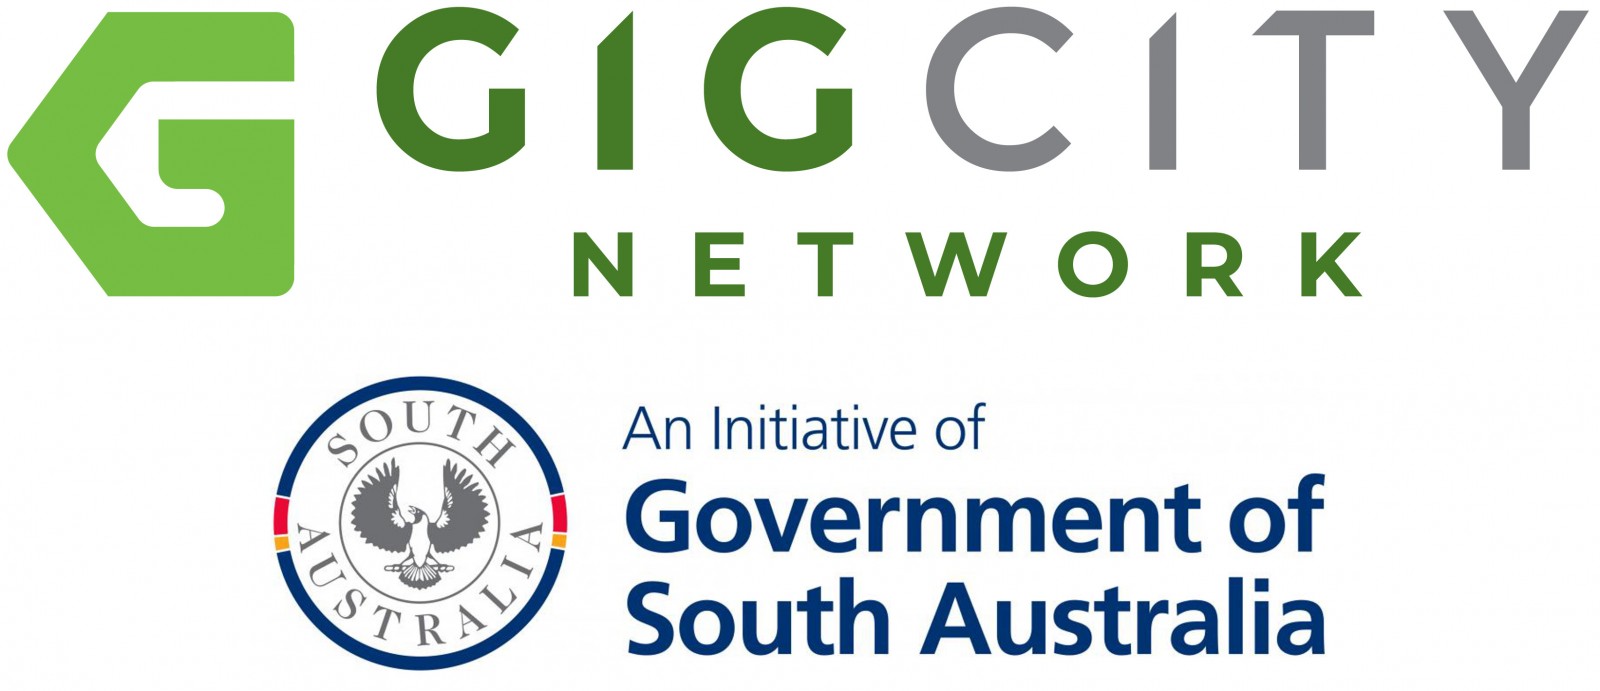 GigCity network to expand to Whyalla and Mount Gambier assets/images/projects/GigCity_Logo_Flat.jpg